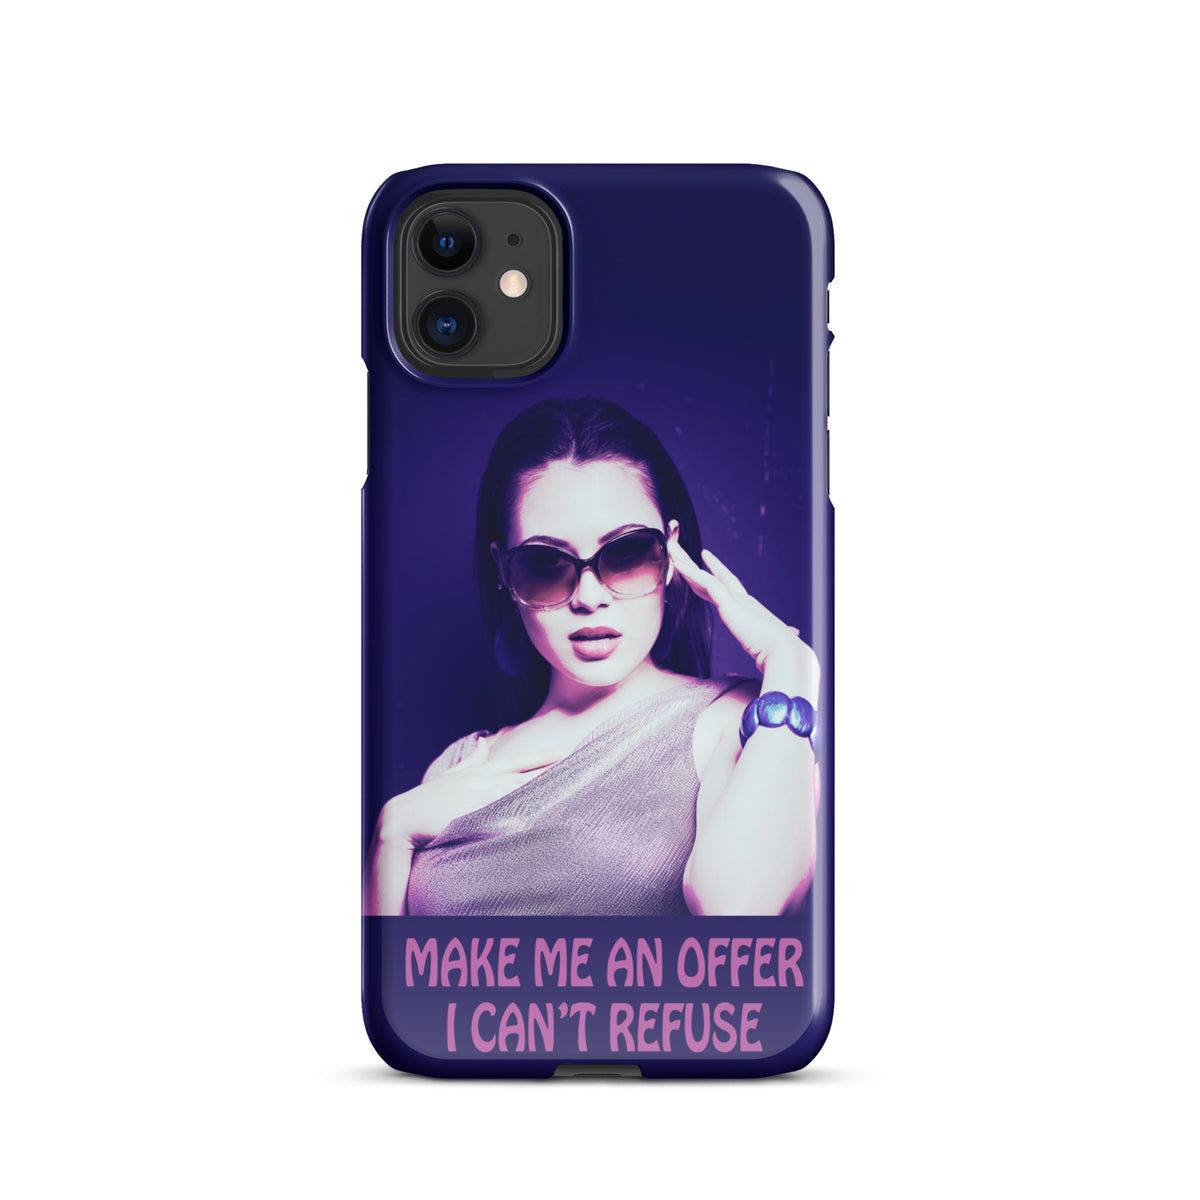 iPhone case with a purple wrap and an image of a young woman in sunglasses. There is pink text that reads Make Me An Offer I Can't Refuse